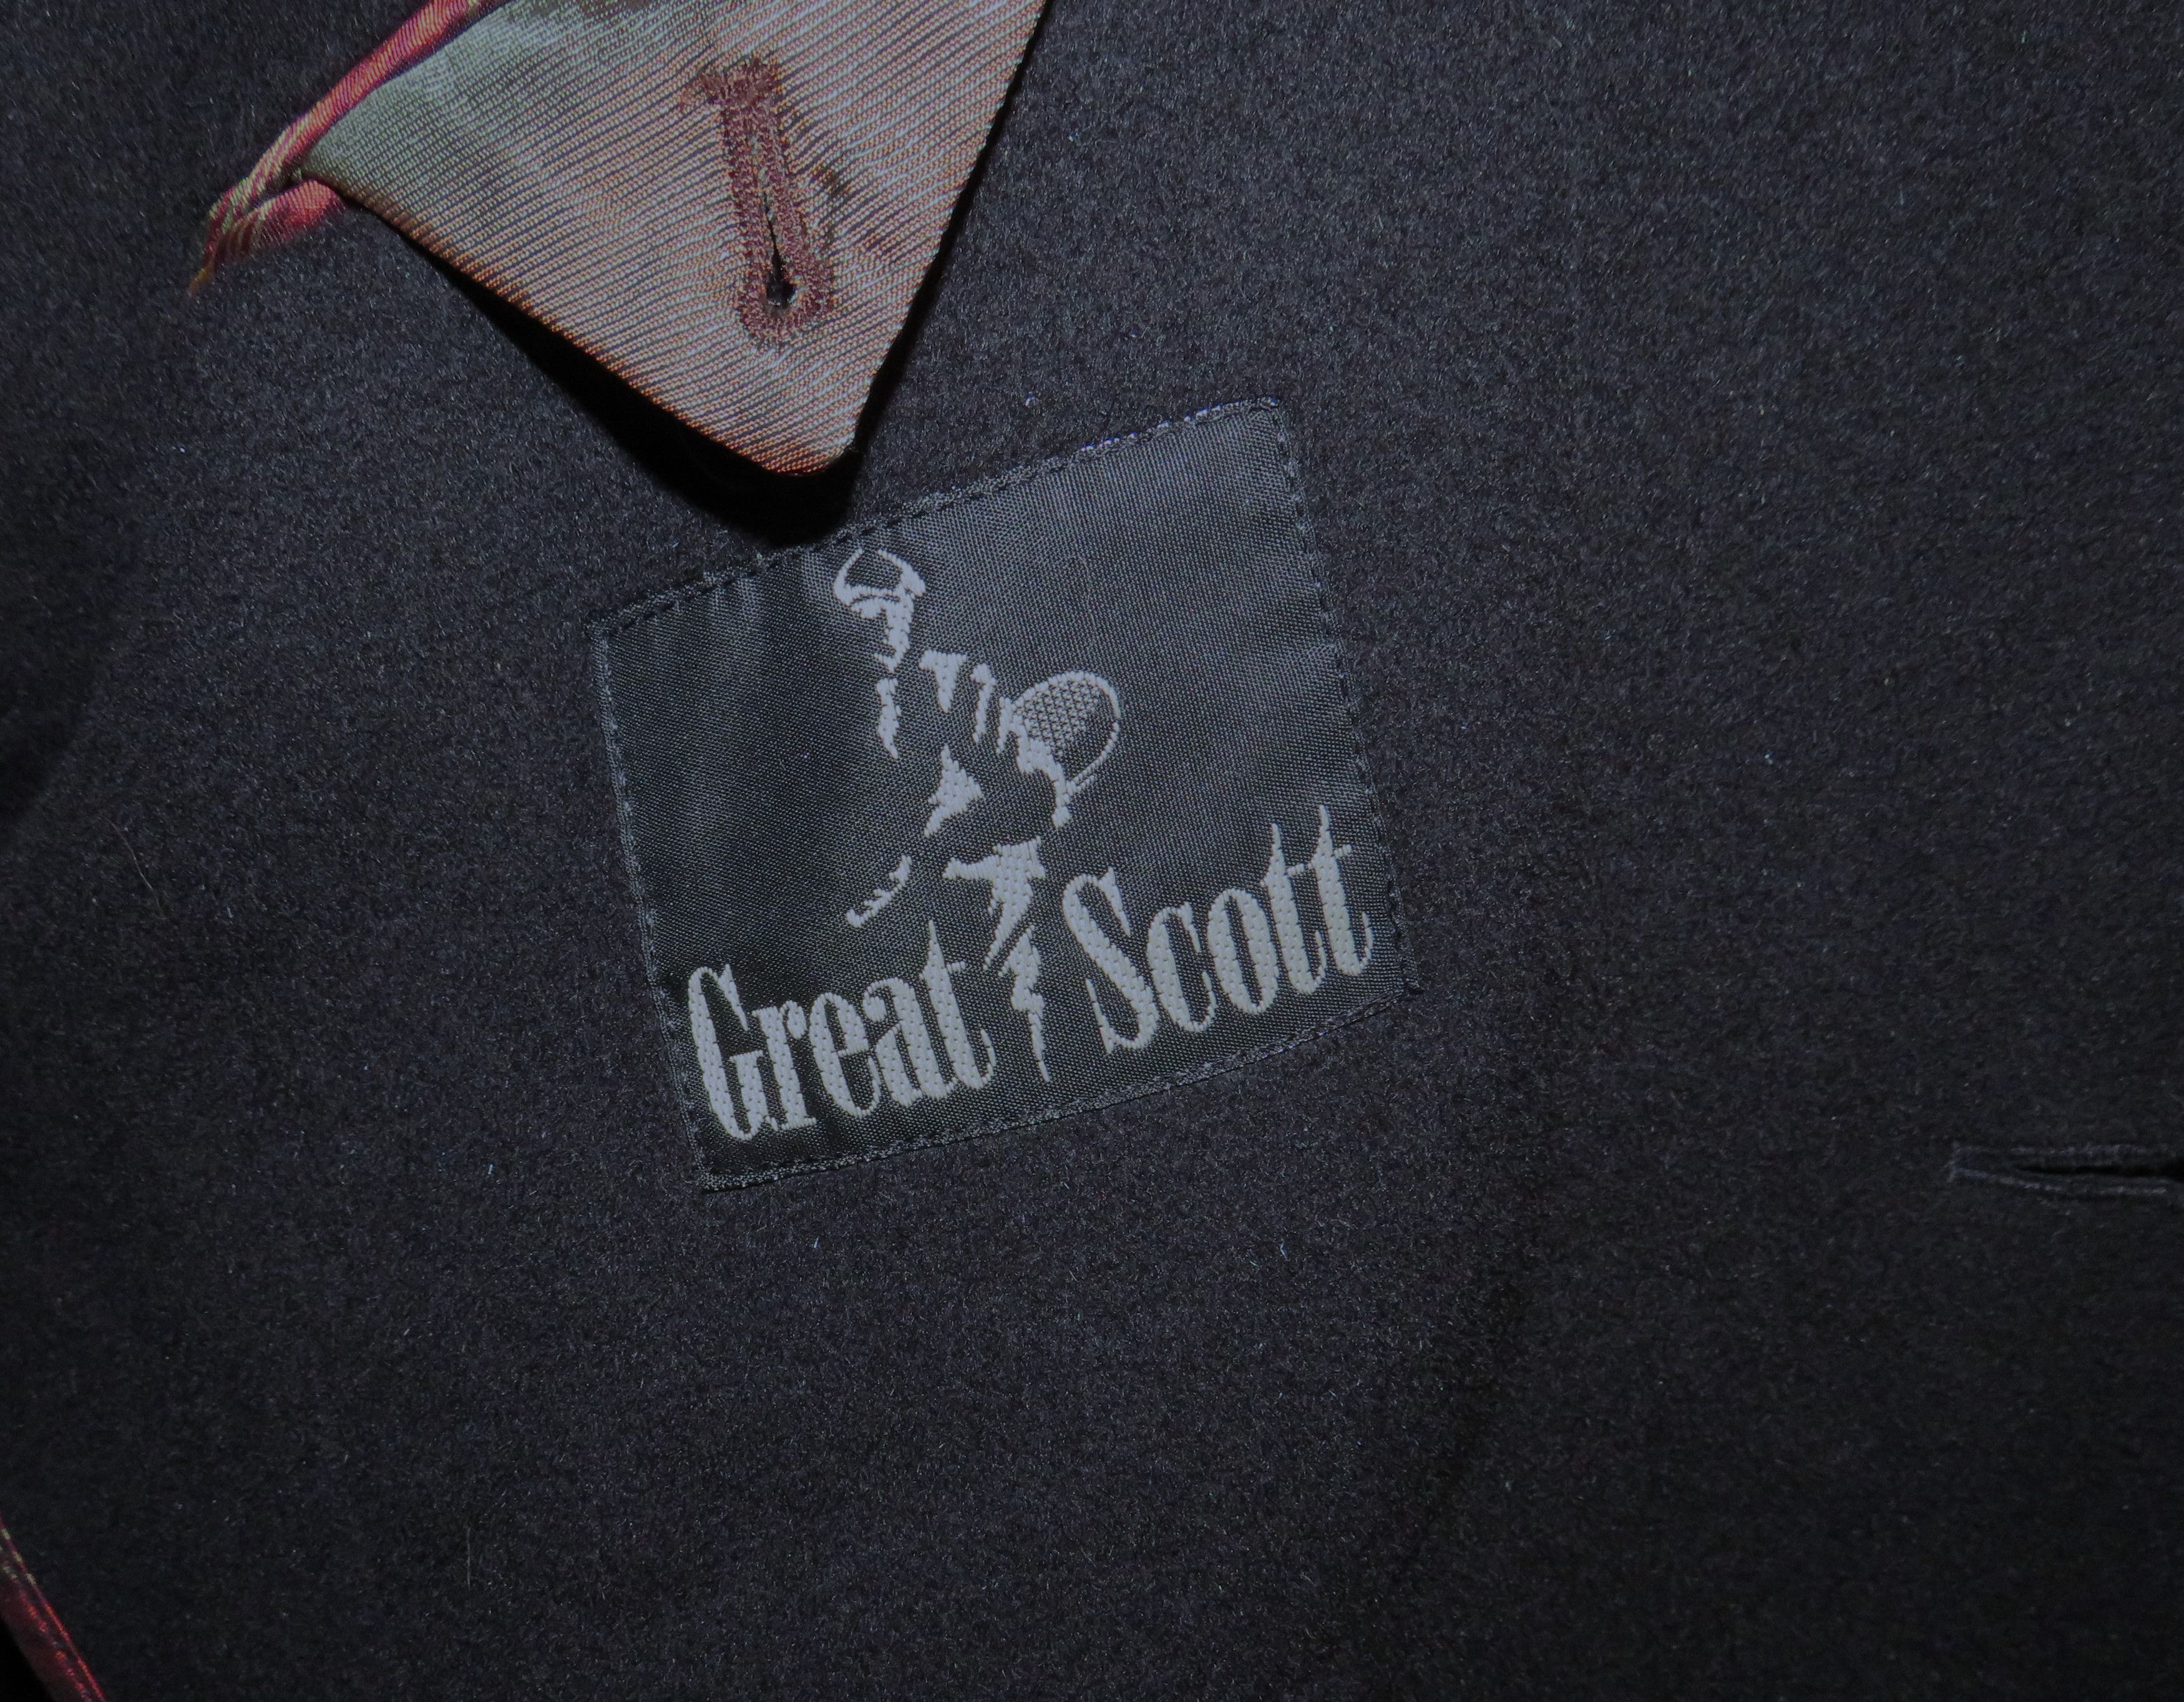 Other Great Scott Angora Blend Black Brushed Flannel Top Coat 46 Size US XL / EU 56 / 4 - 12 Preview